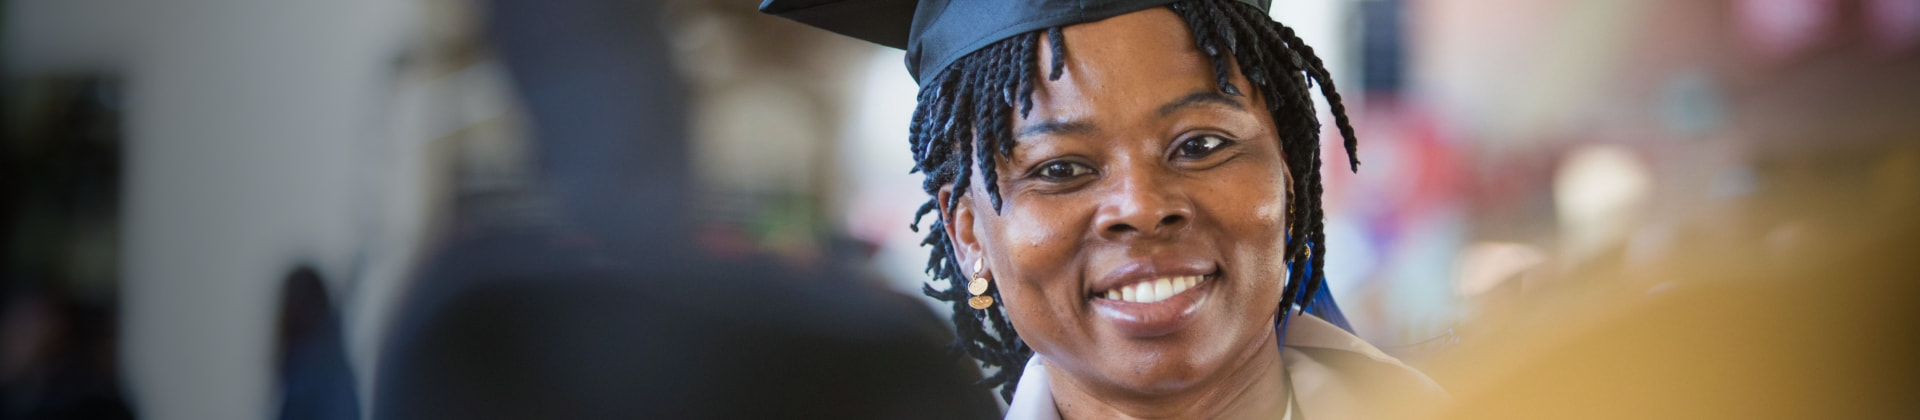 Woman with short twists wears a cap and gown on her graduation day